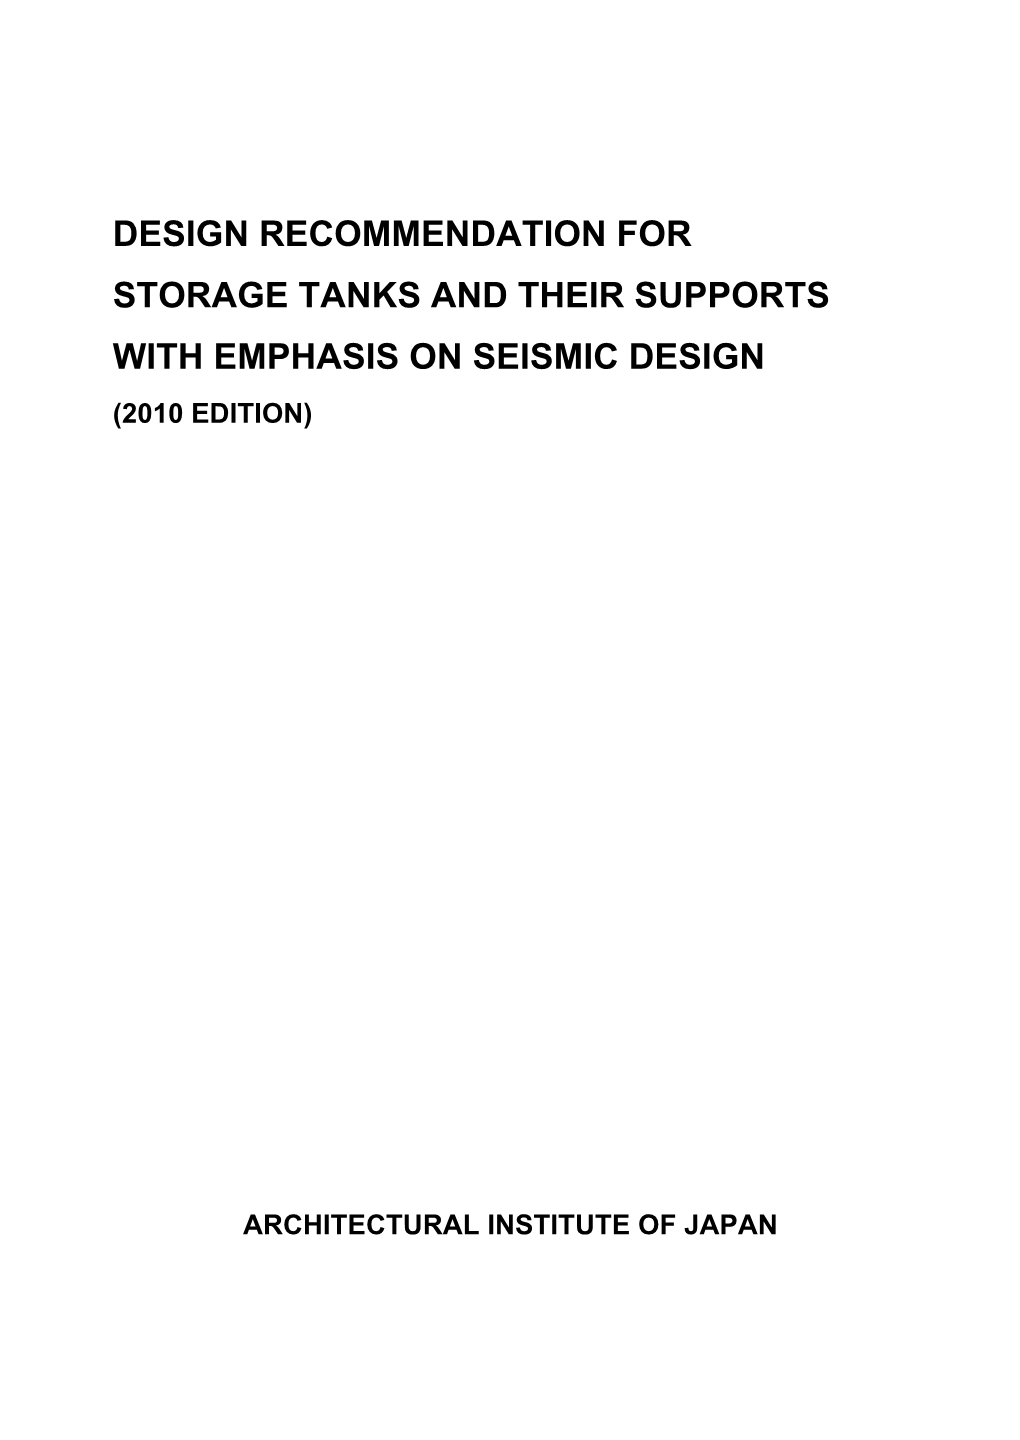 Design Recommendation for Storage Tanks and Their Supports with Emphasis on Seismic Design (2010 Edition)